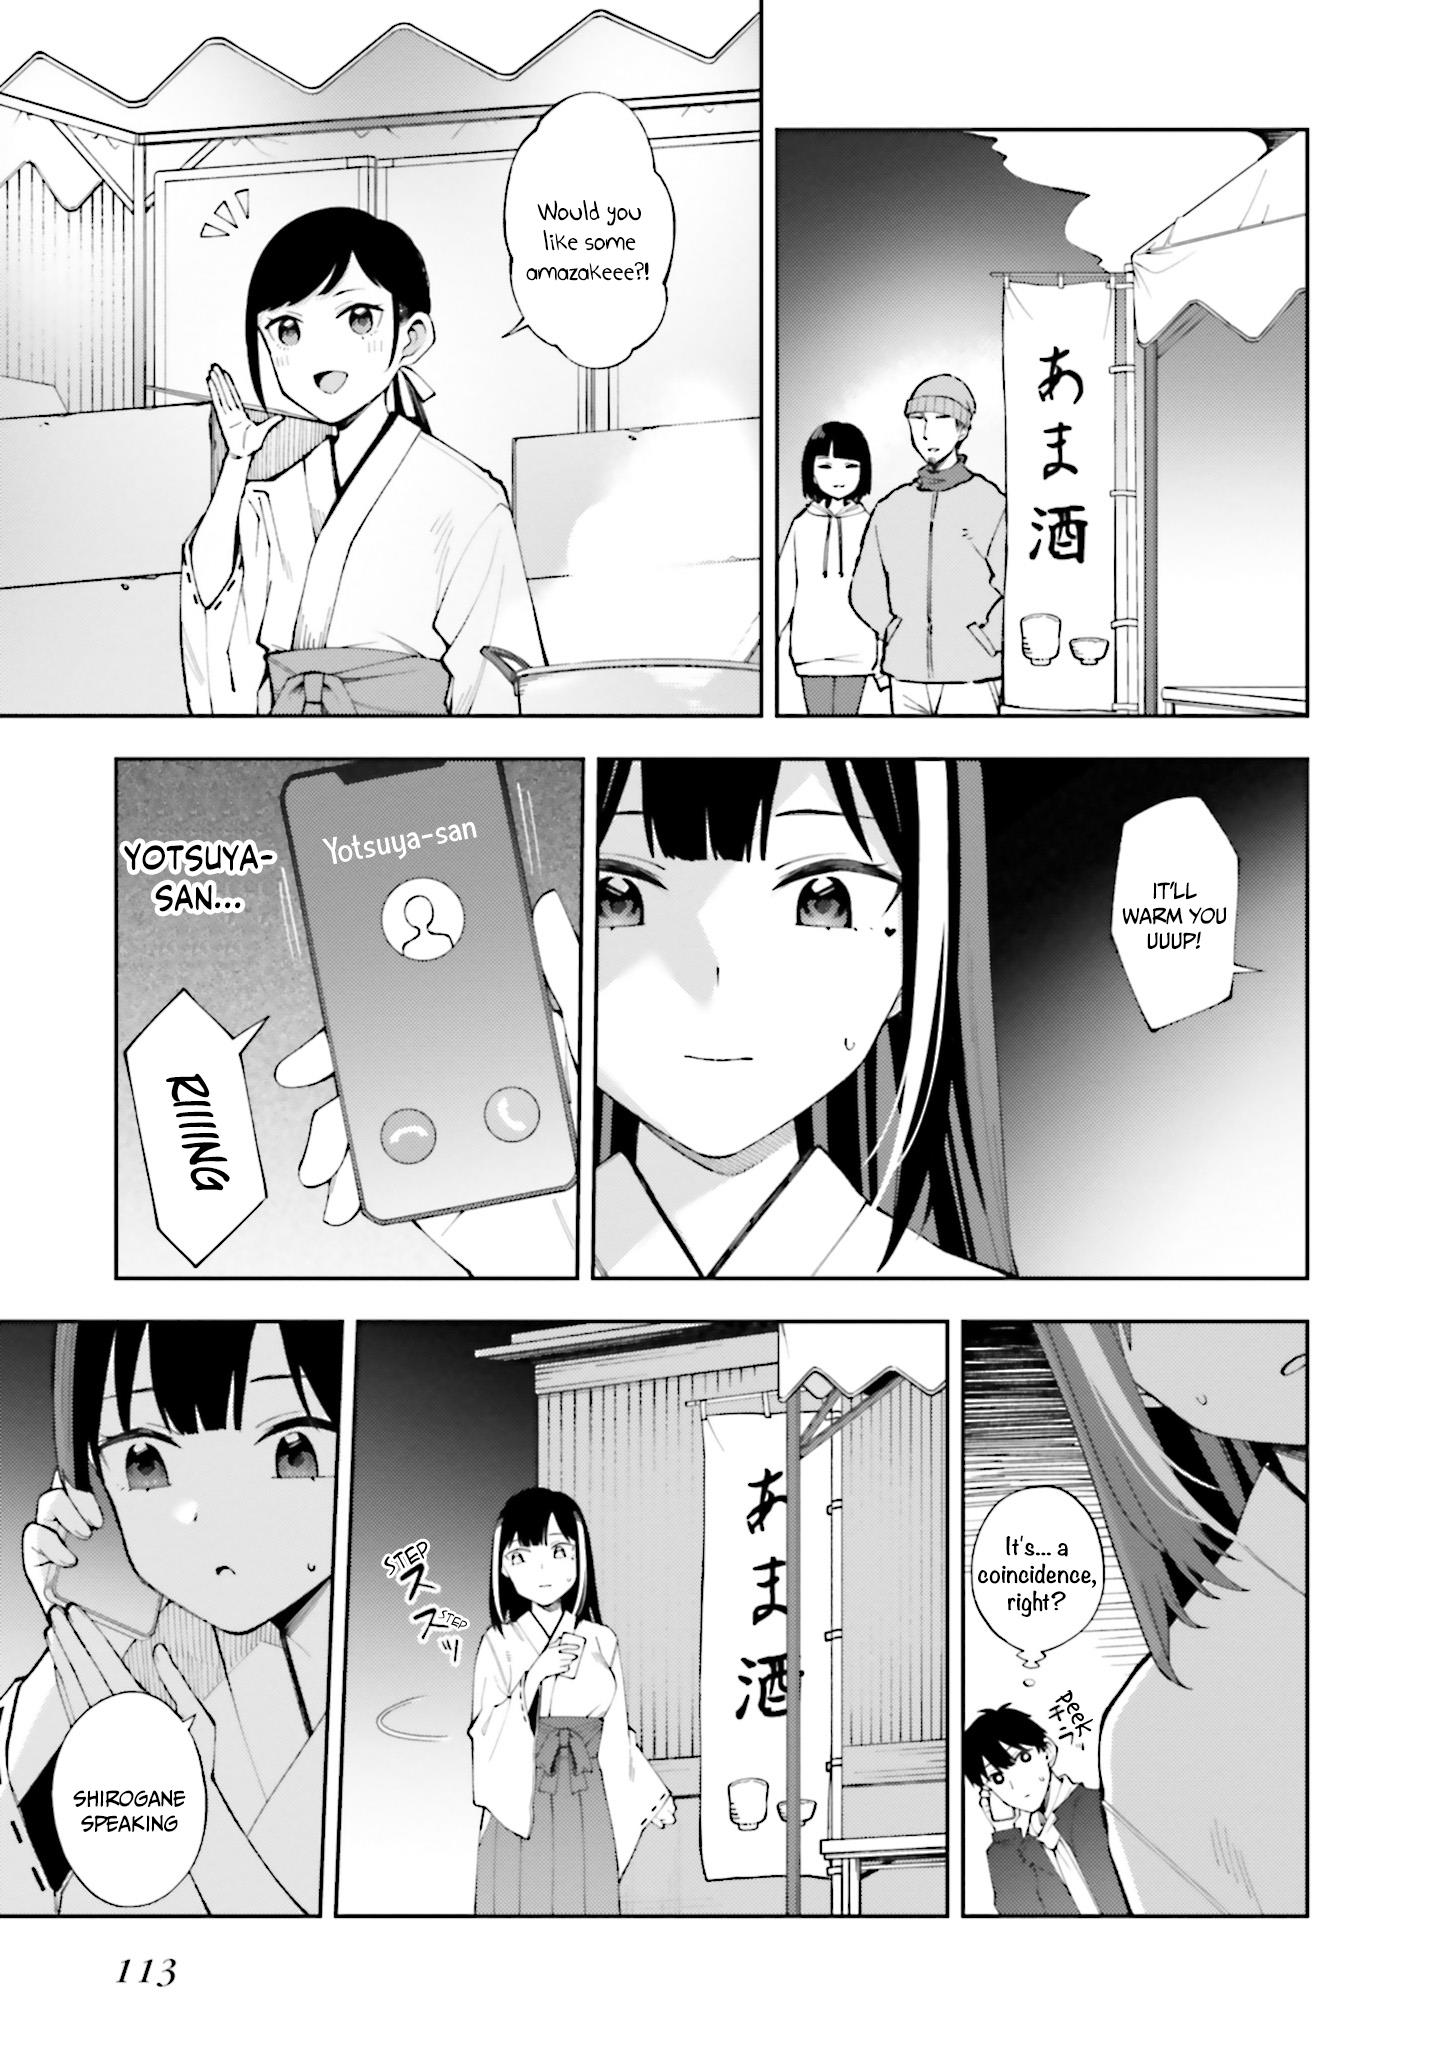 I Don't Understand Shirogane-San's Facial Expression At All - Page 2